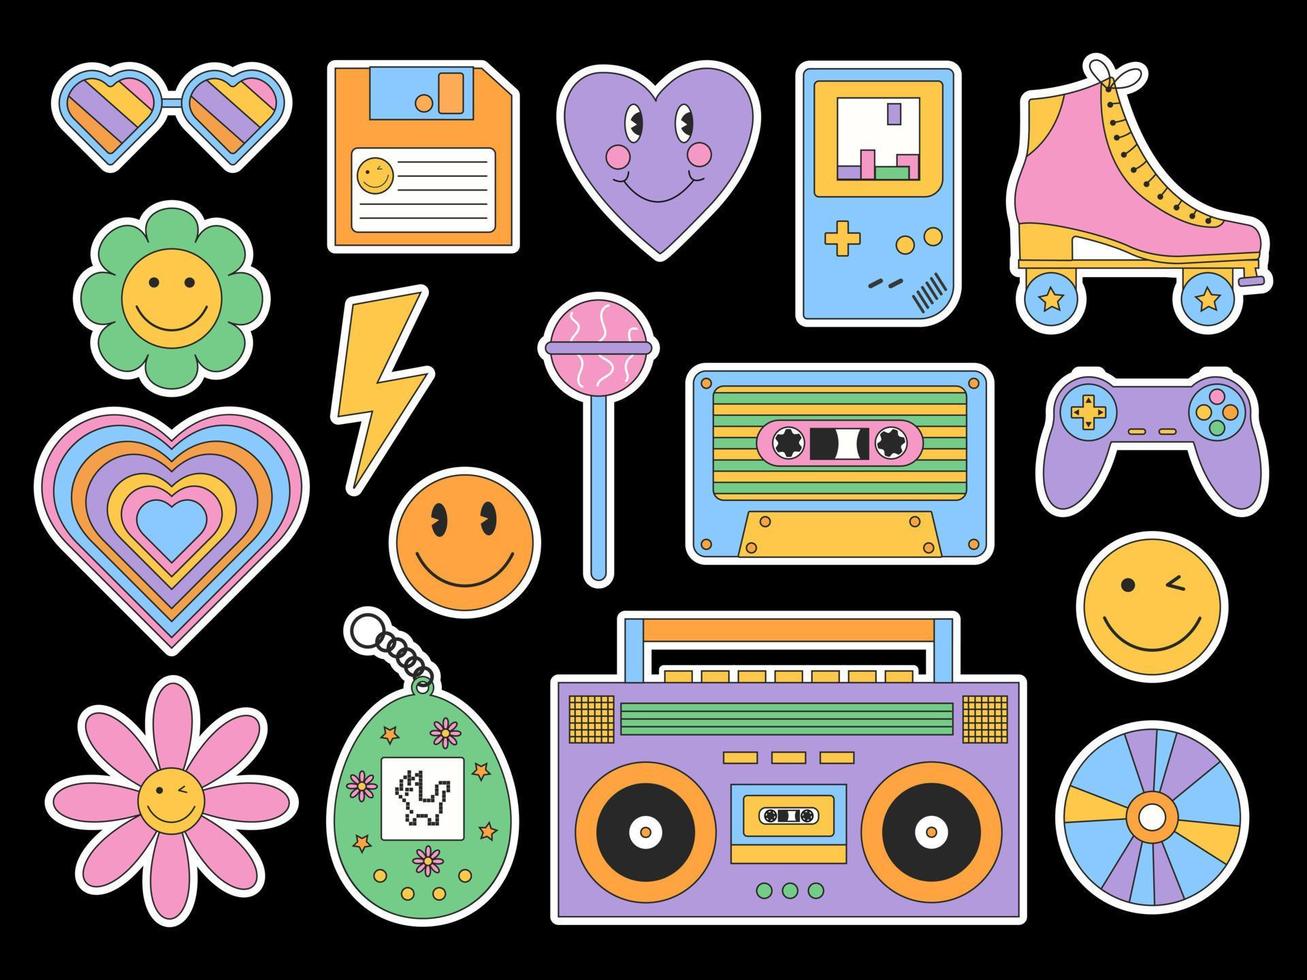 https://static.vecteezy.com/system/resources/previews/022/387/937/non_2x/set-of-cute-80s-90s-nostalgic-stickers-on-white-background-hippie-retro-vintage-icons-in-70s-80s-style-collection-of-trendy-old-school-graphics-vector.jpg